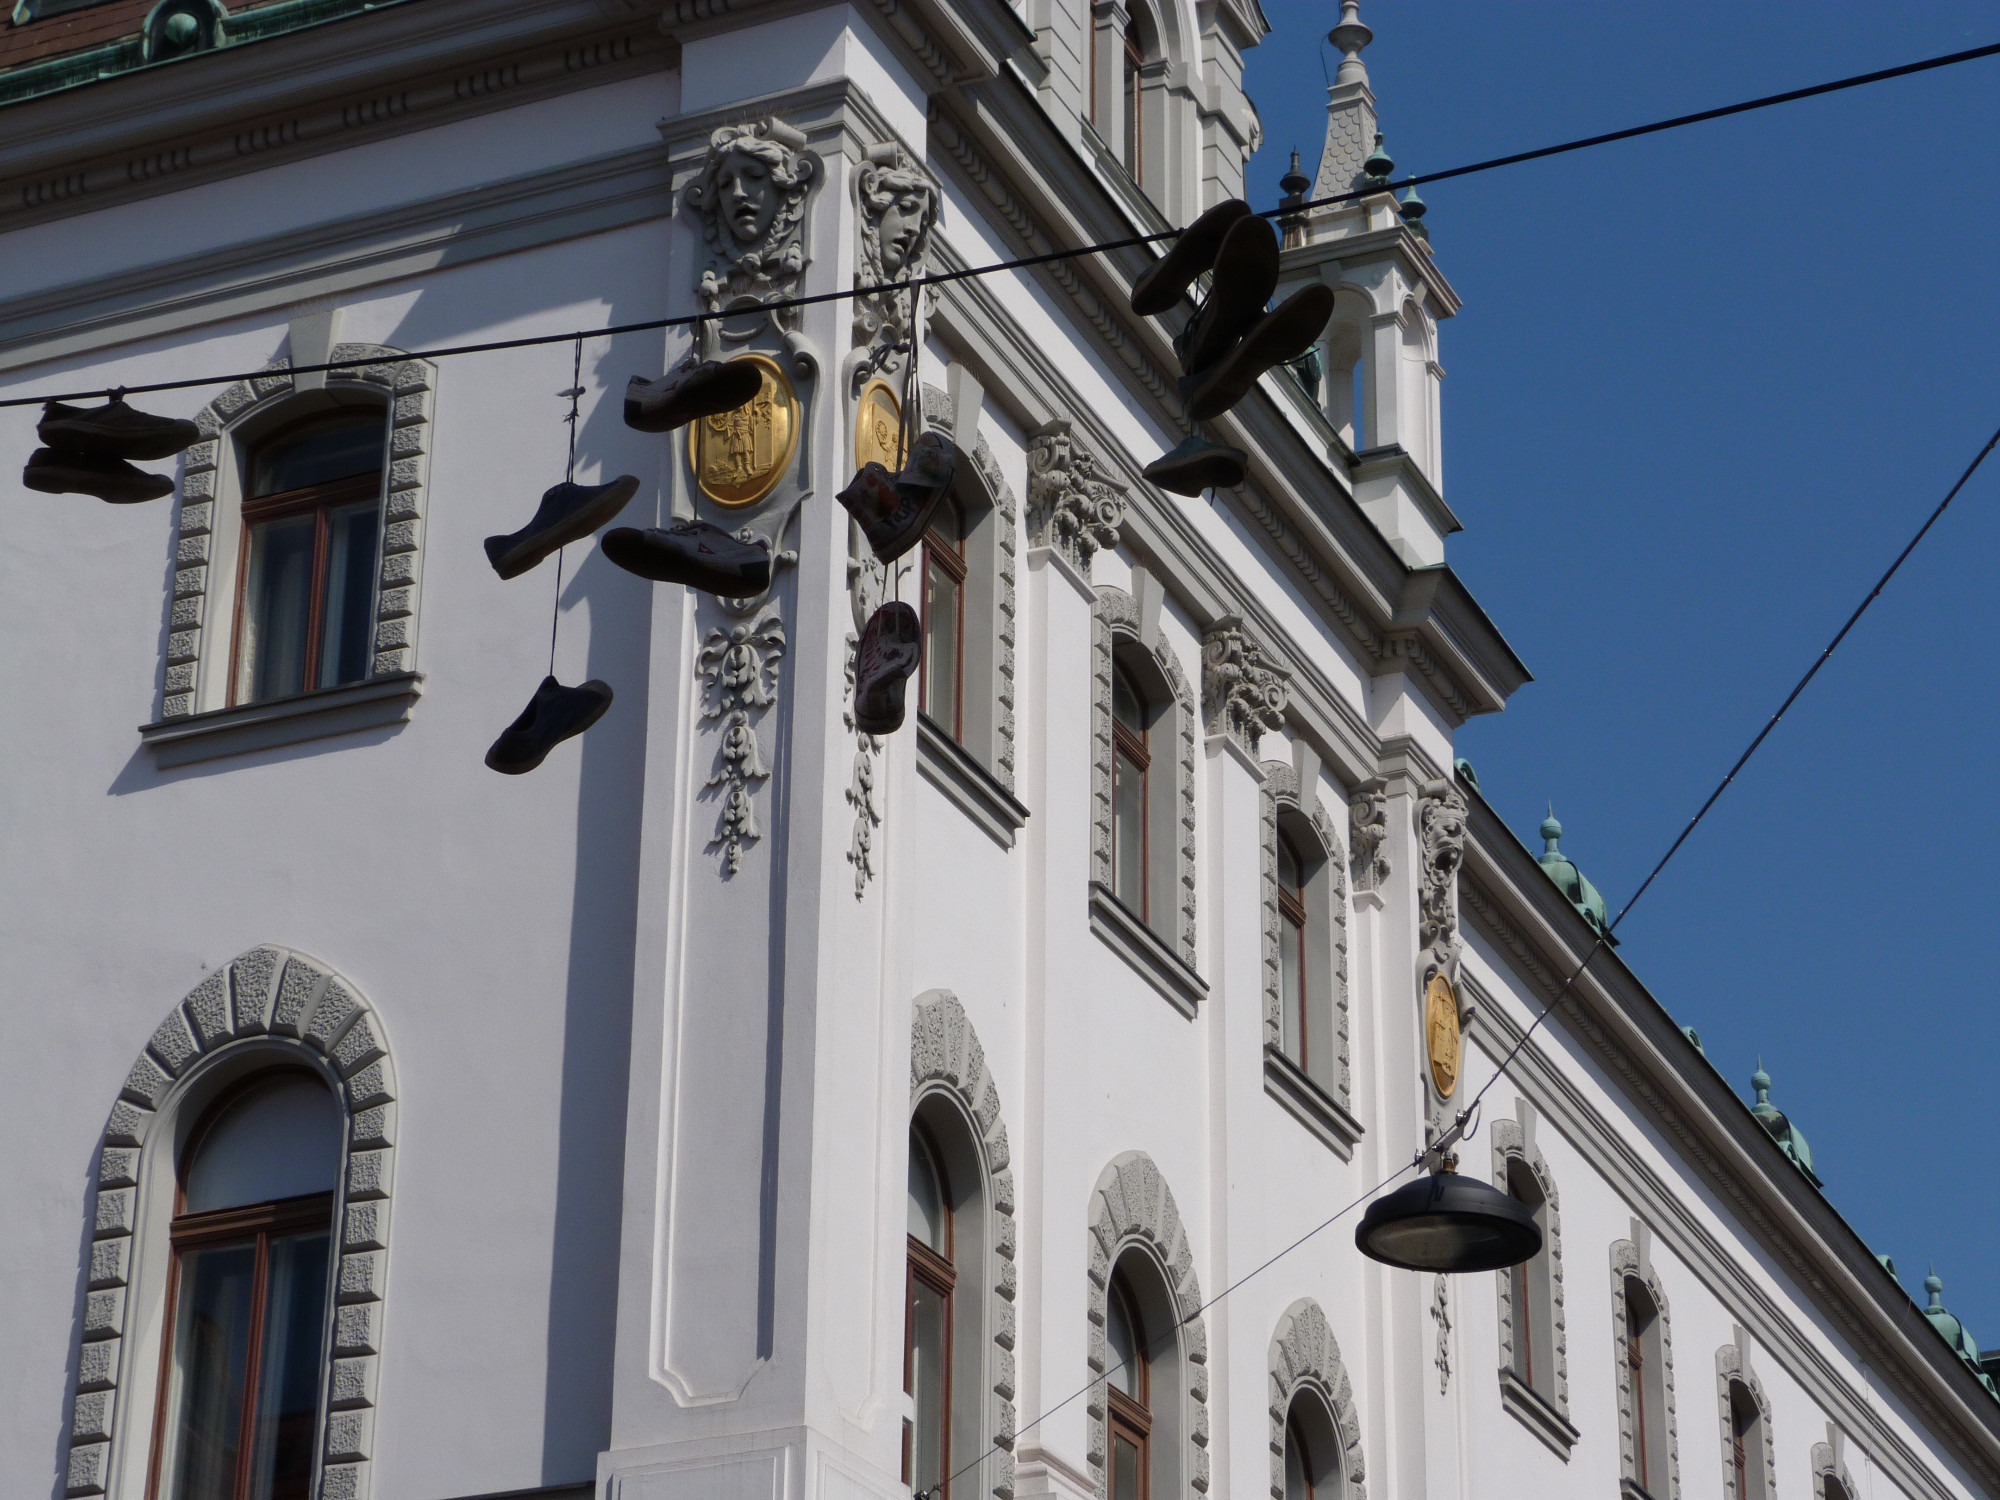 Shoes hanging from telephone wires